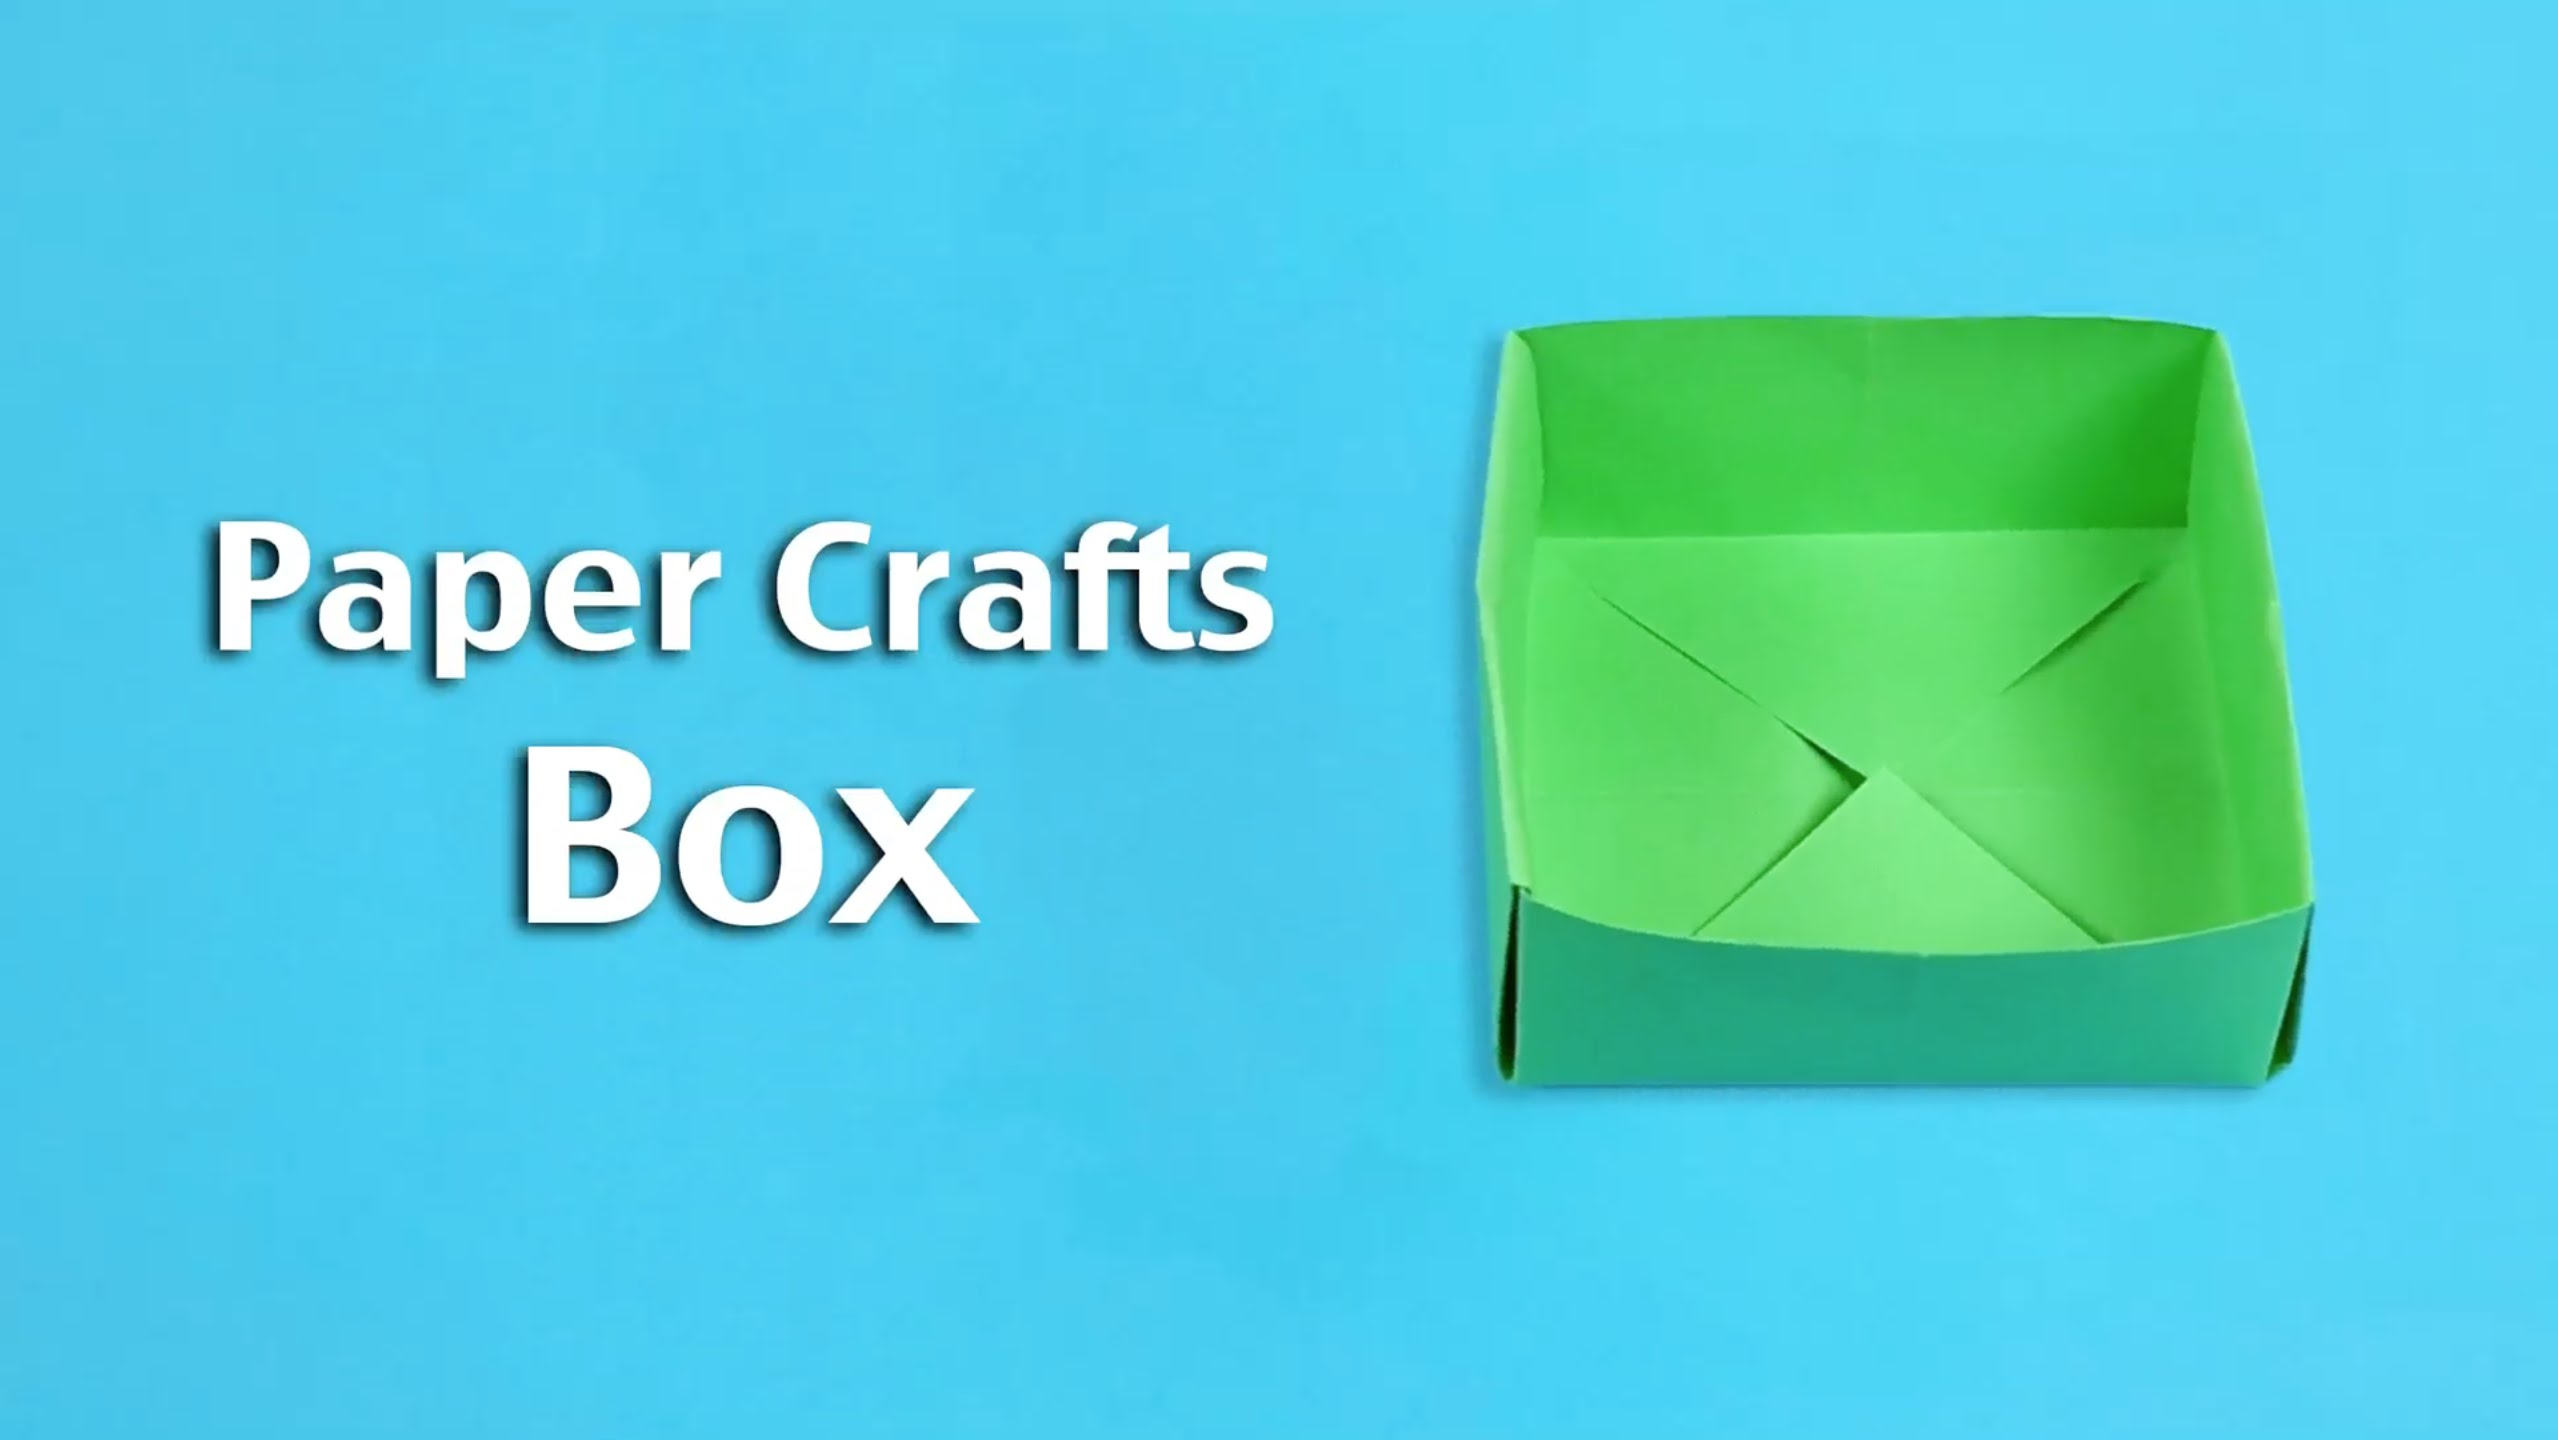 How To Make A Origami Paper Box How To Make Simple Origami Paper Craft For Kids Tutorial Paper Box